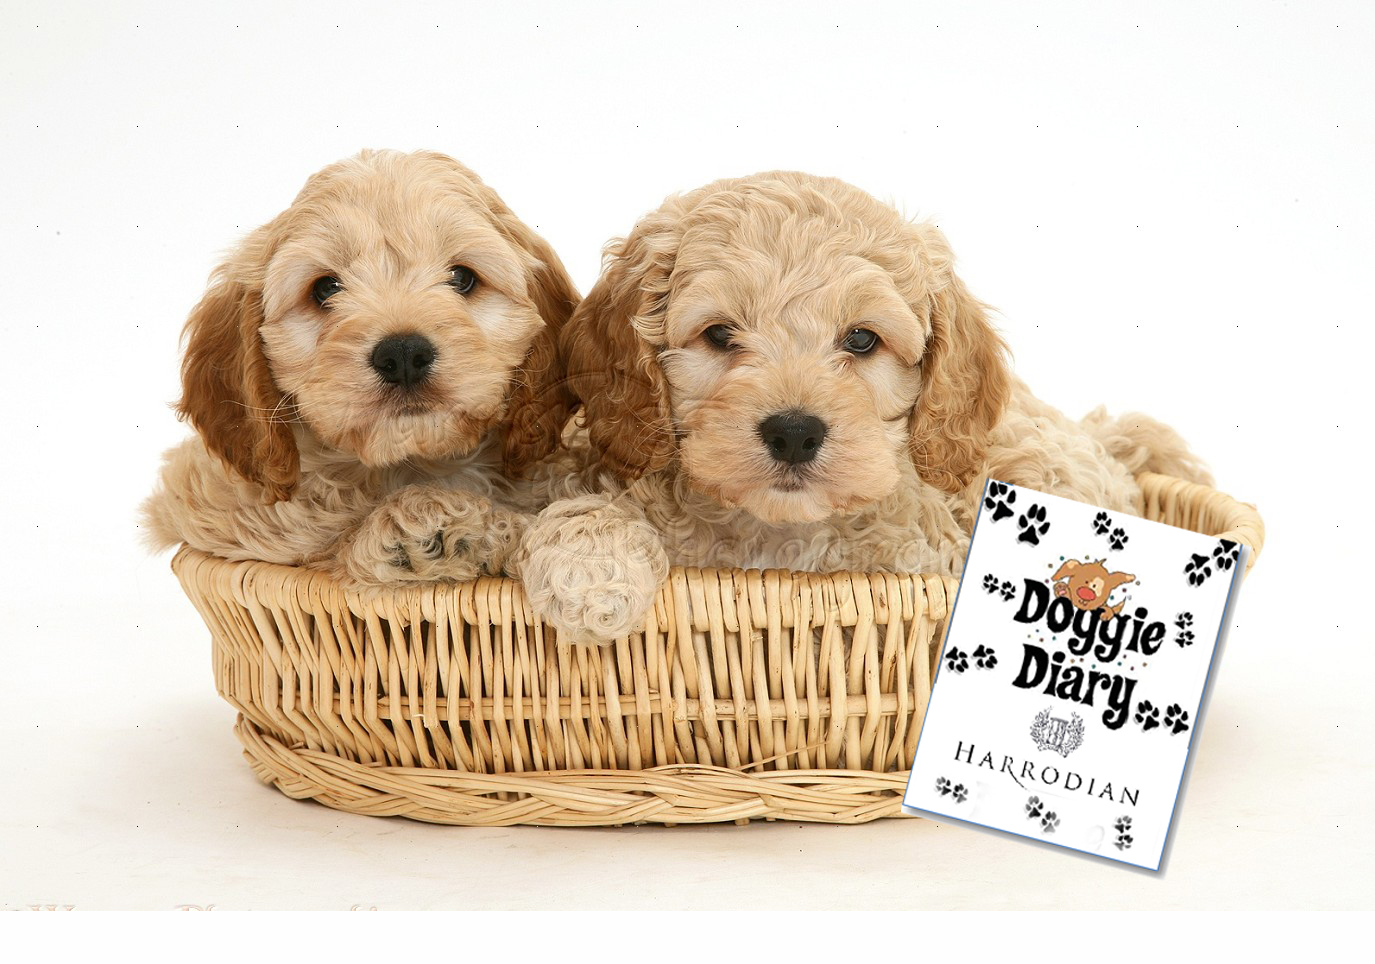 Final%20doggie%20diary%20image%20for%20website.jpg